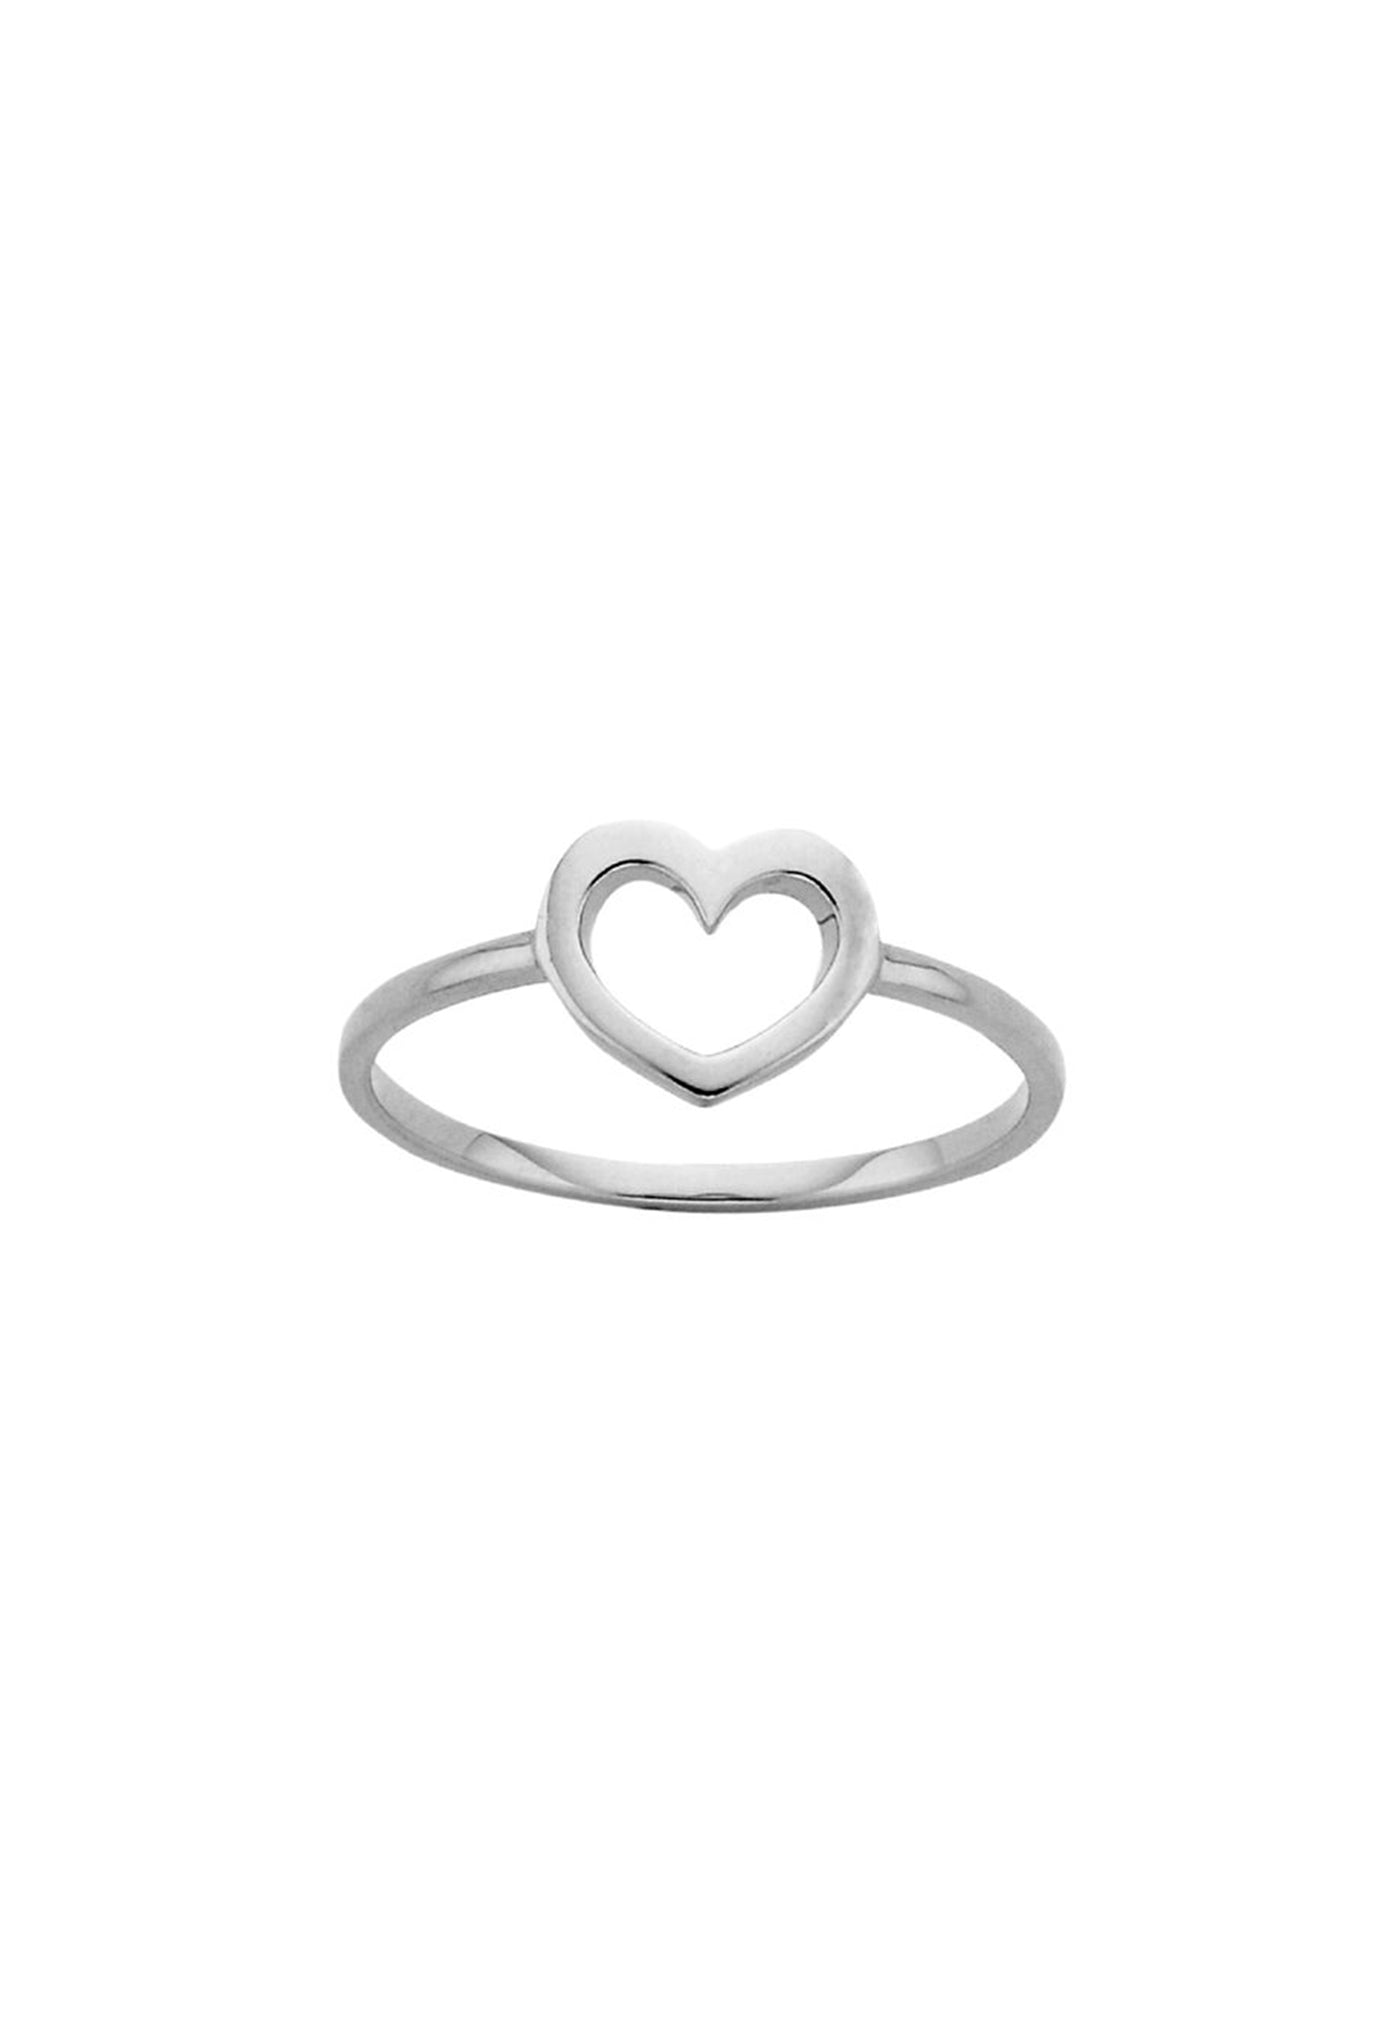 Mini Heart Ring sold by Angel Divine